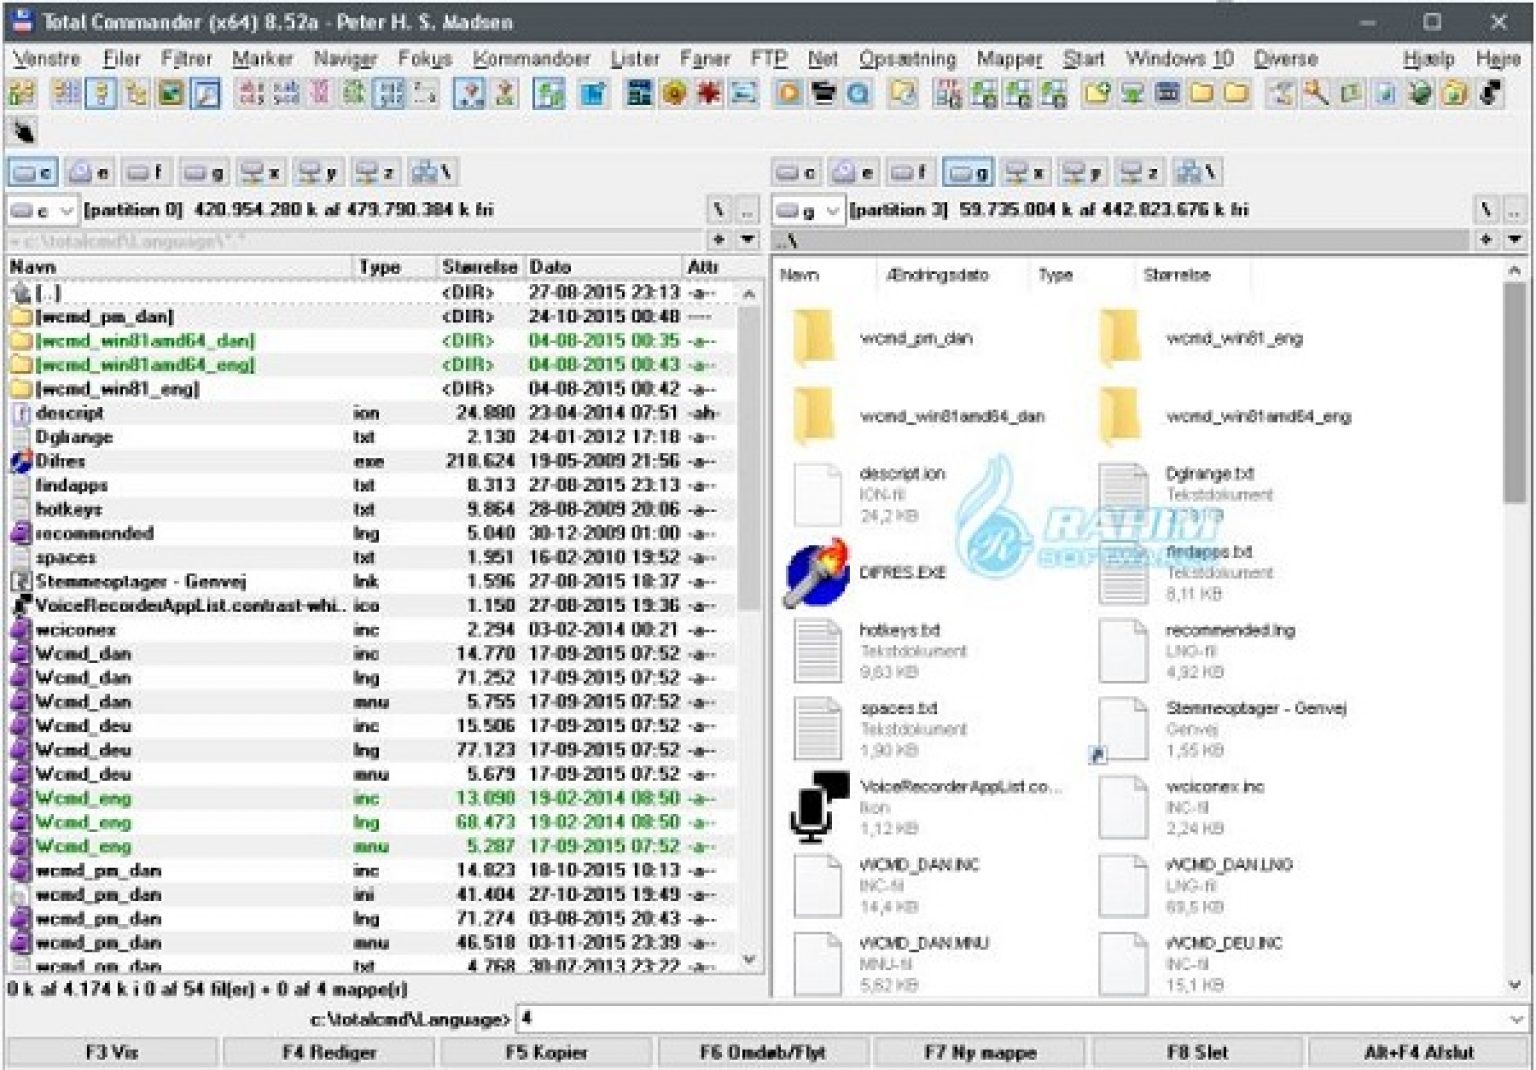 Solid Commander 10.1.16864.10346 download the last version for mac